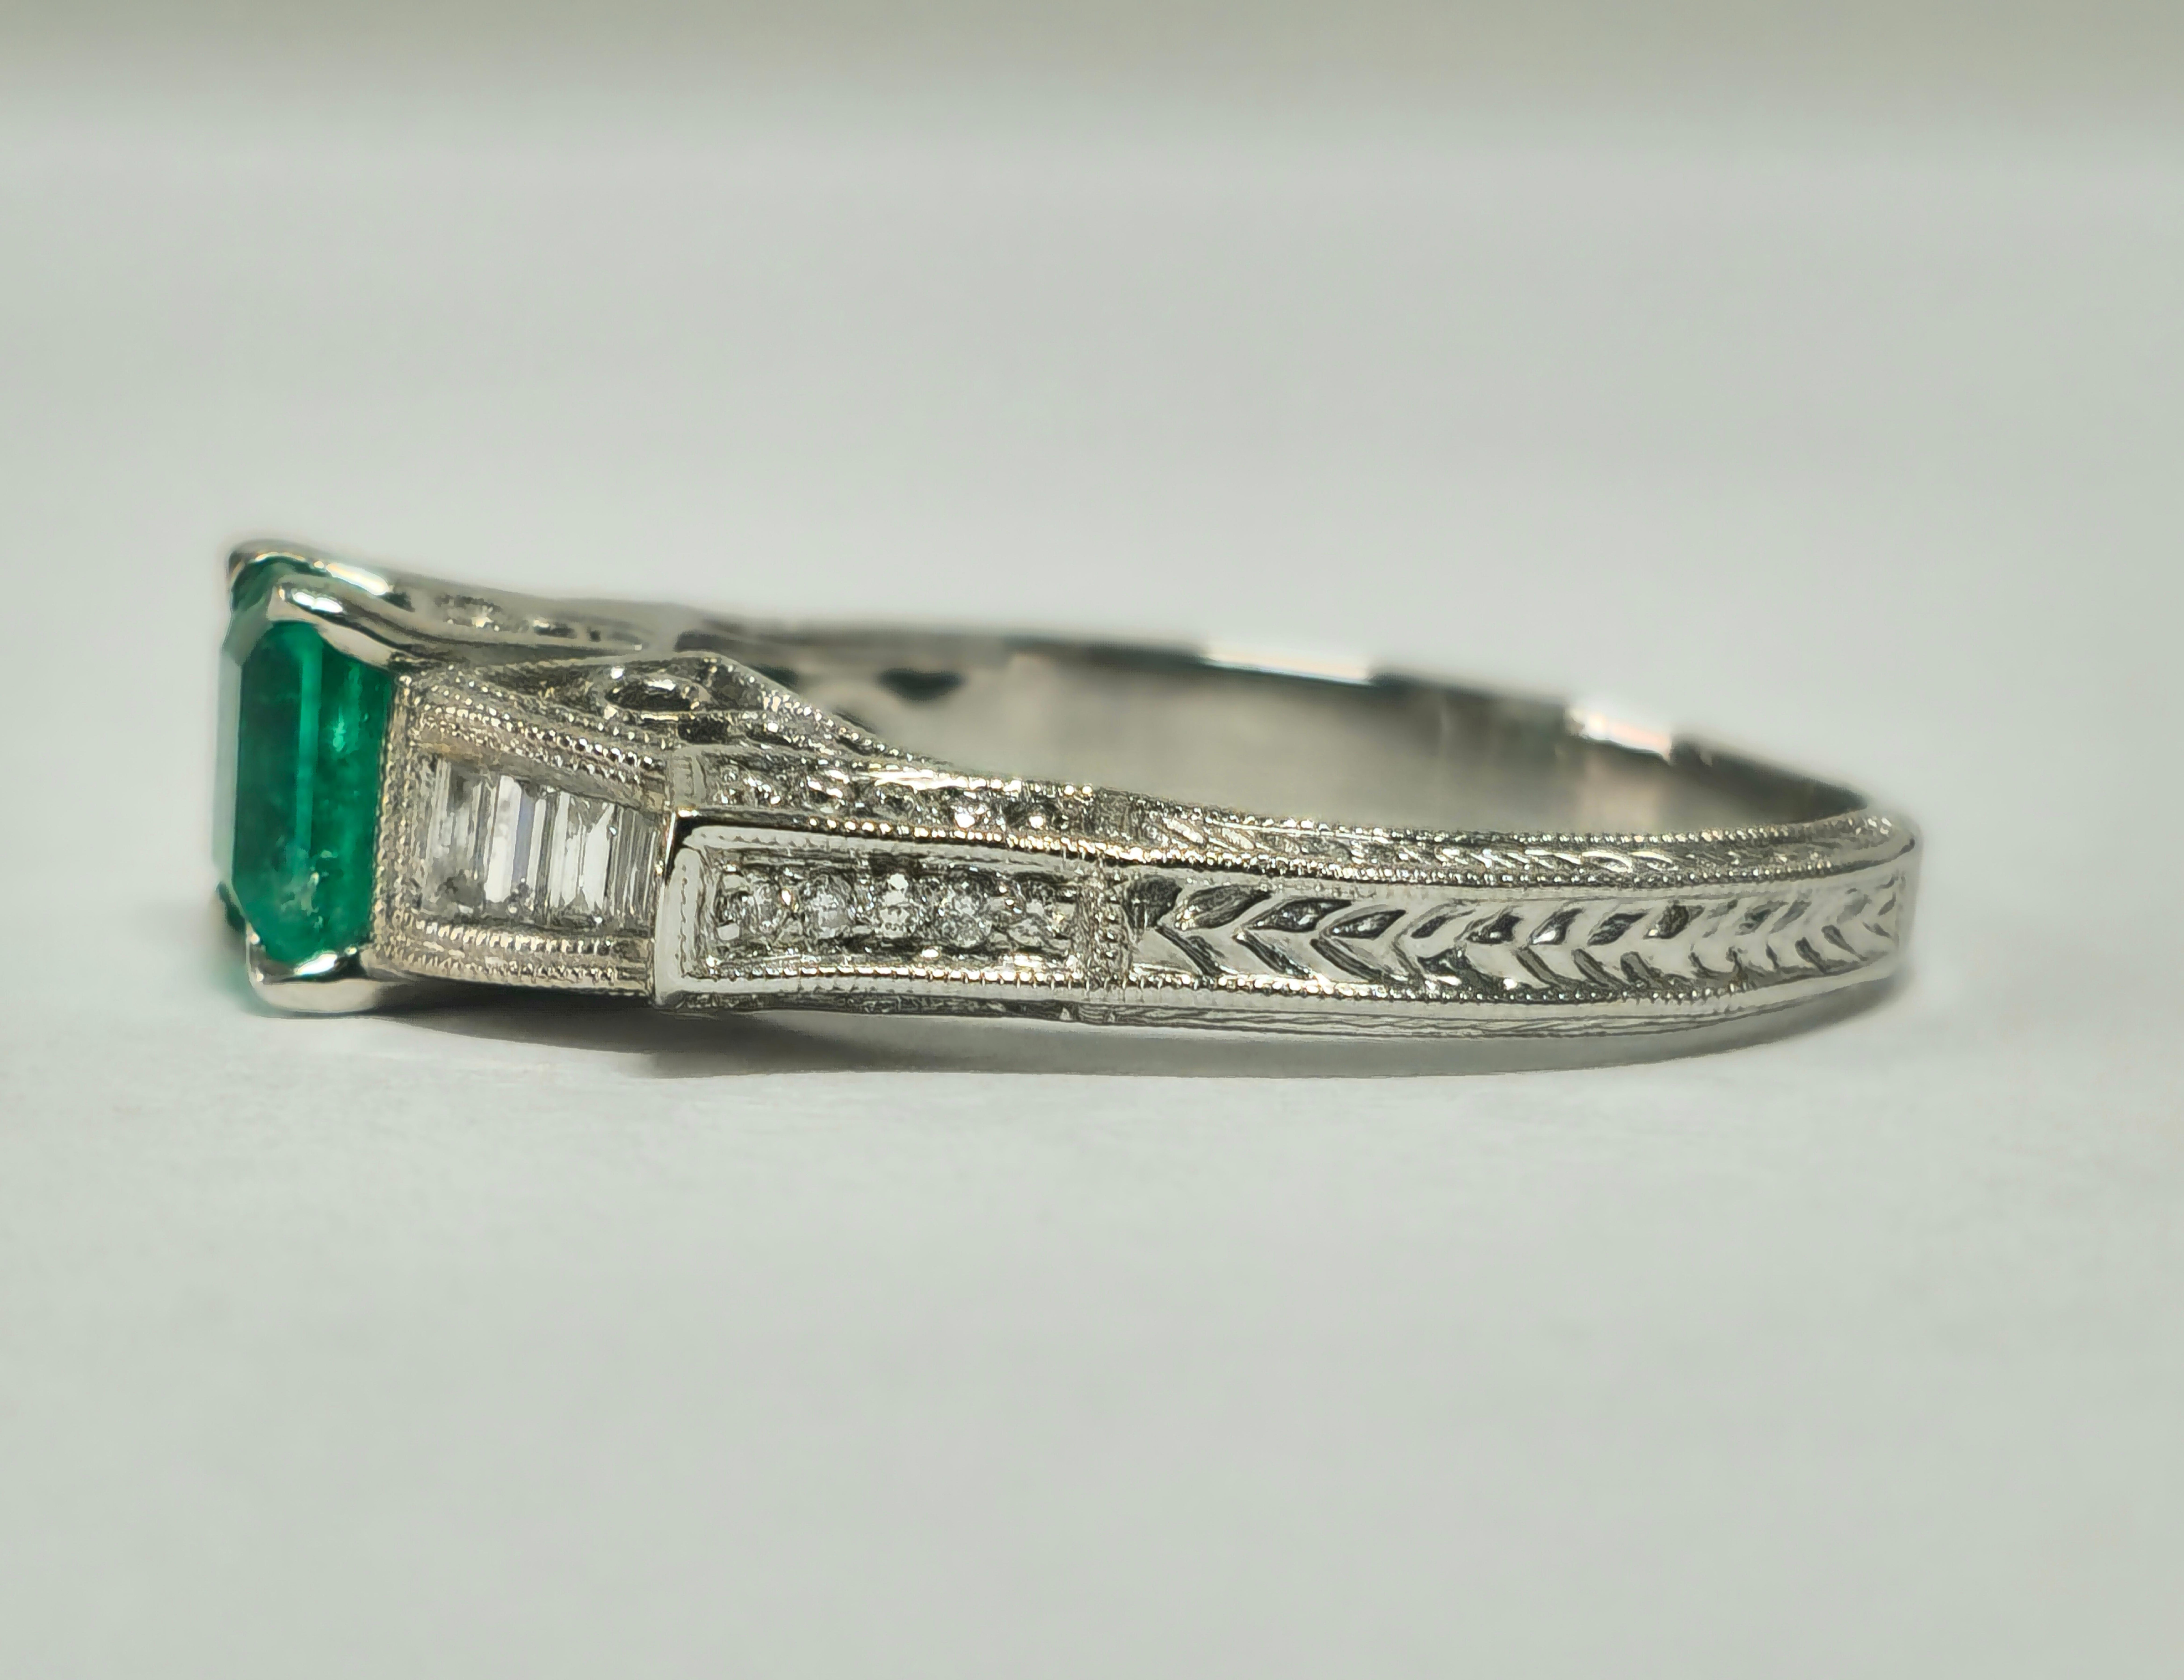 Crafted from exquisite 14K white gold, our stunning ring features a captivating 1.50 carat Colombian emerald, boasting rich saturation and color. Surrounding the emerald are sparkling side diamonds totaling 0.30 carats, with VS clarity and F color,